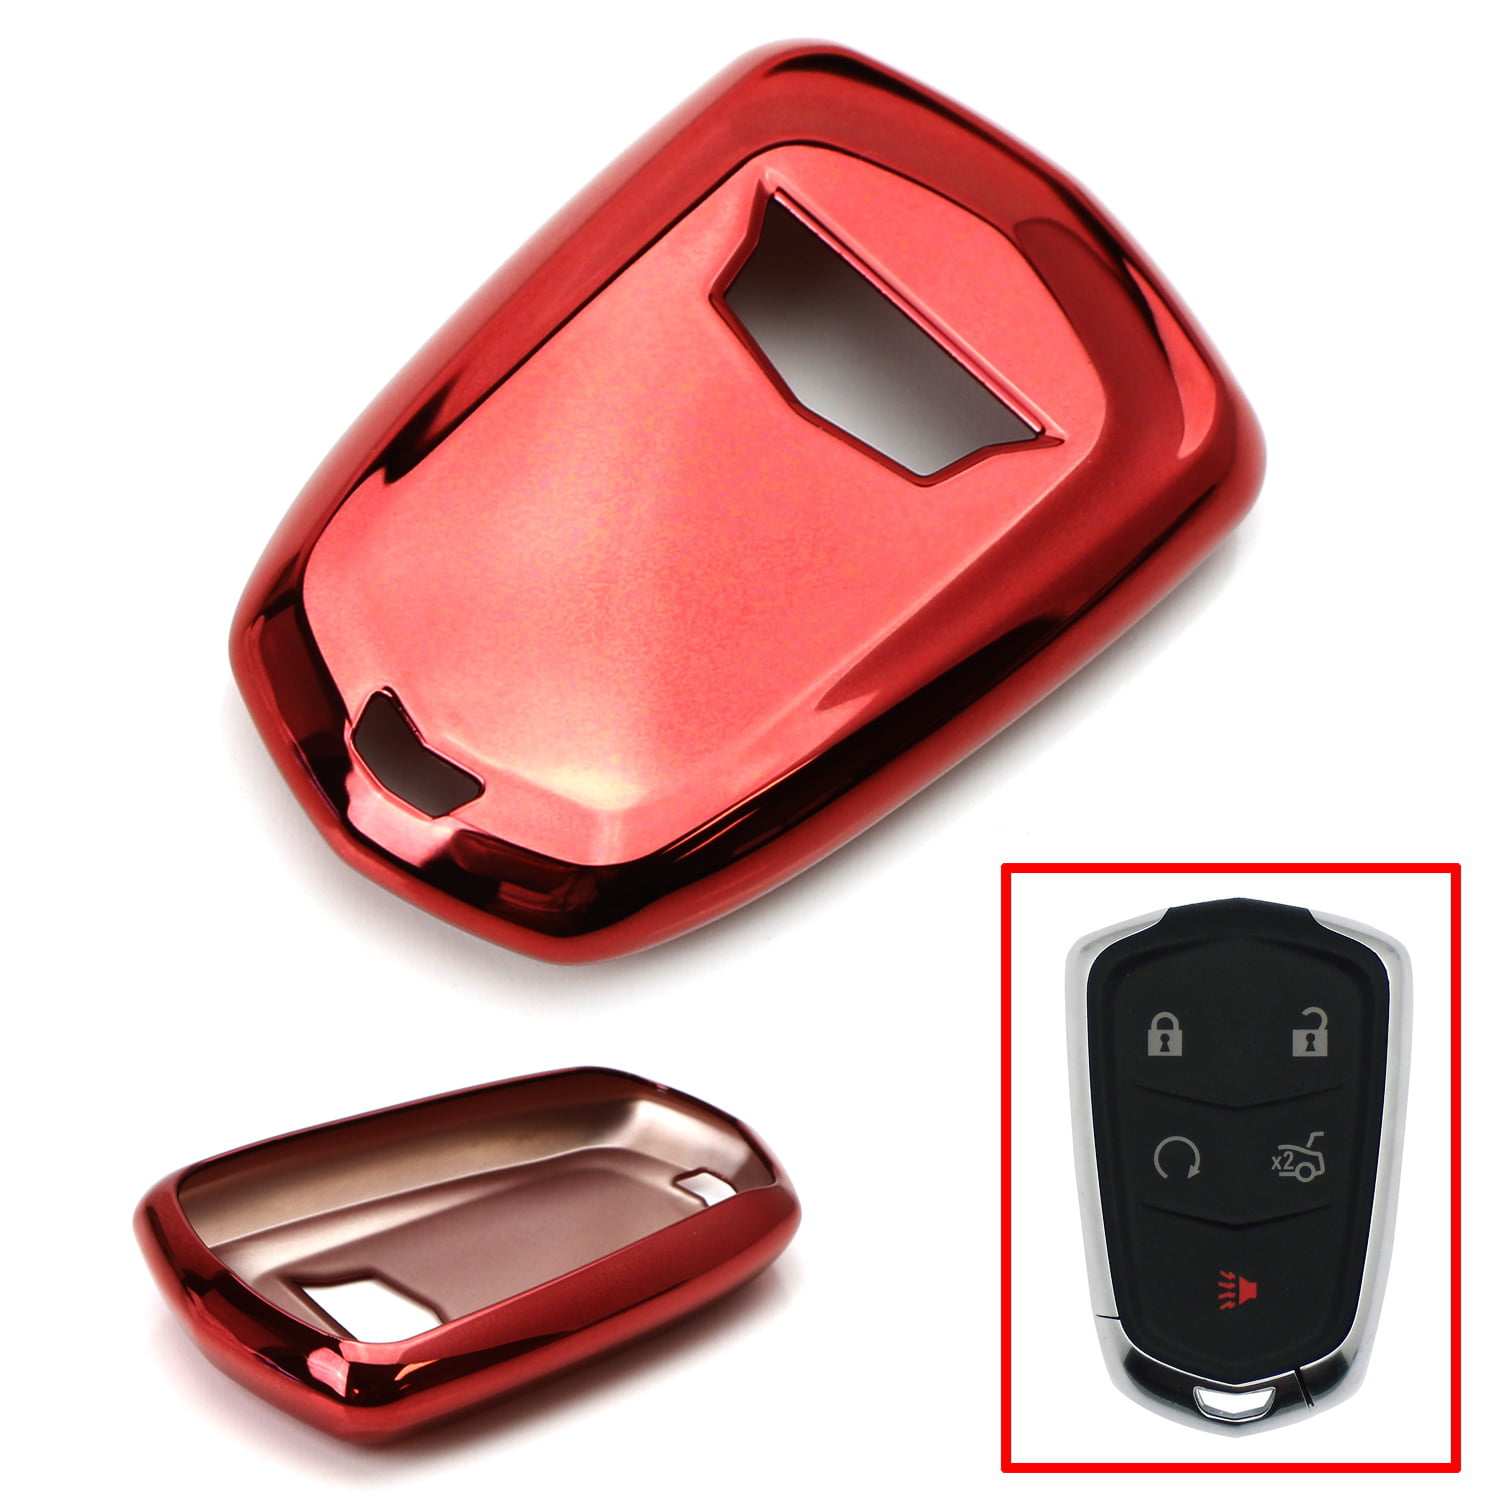 TPU Key Fob Case Full Cover Case Skin Holder For Cadillac ATS CT6 XT5 6 Escalade